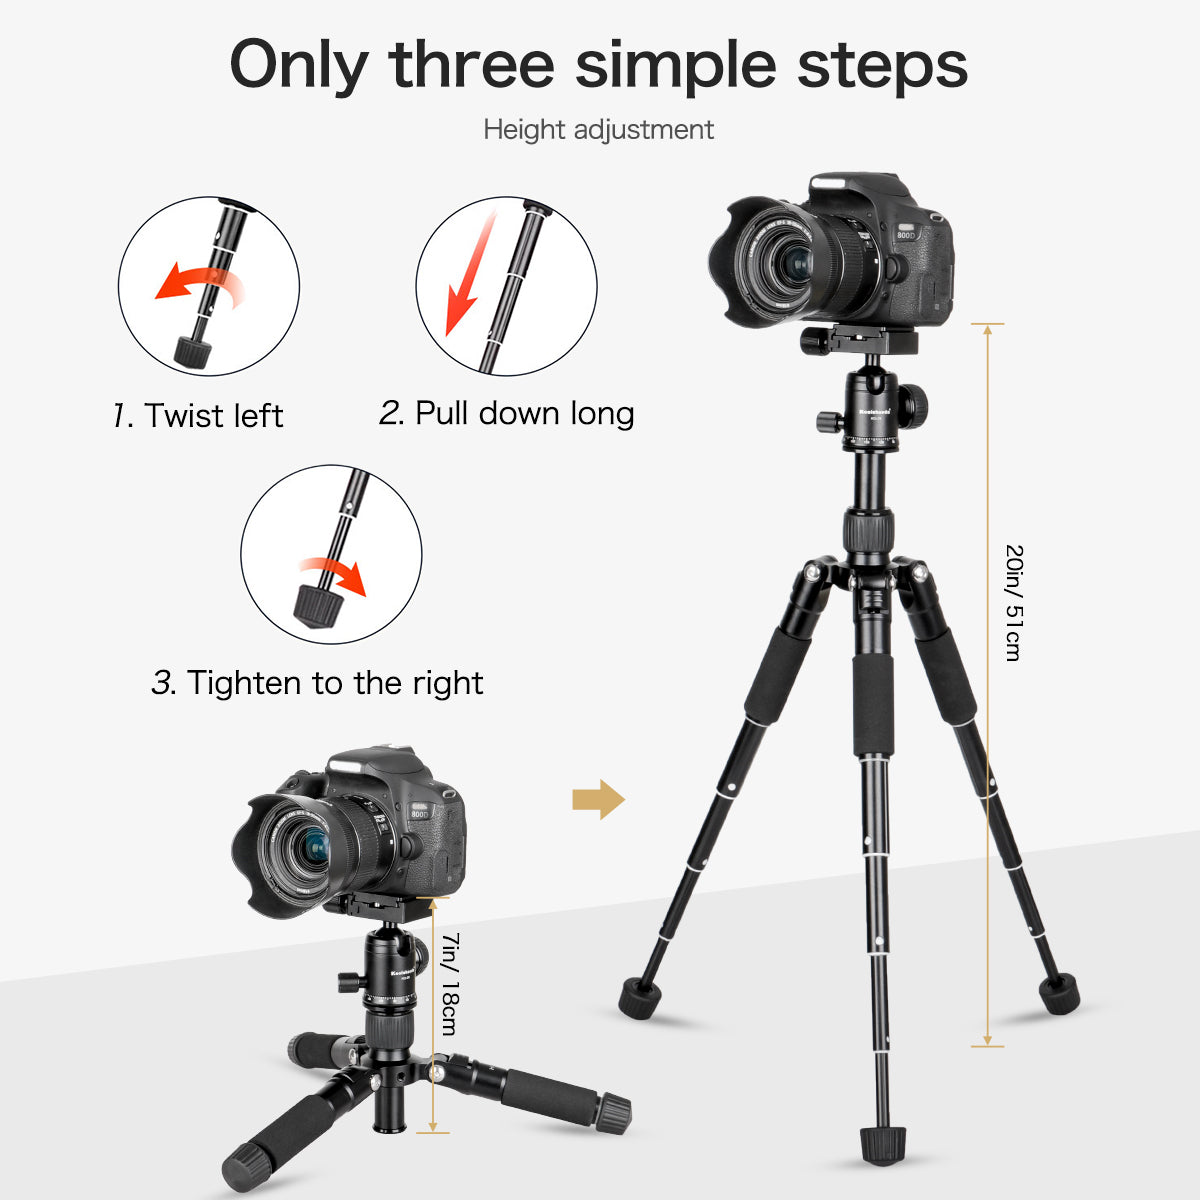 Portable Mini Tripod Aluminum Alloy Tabletop Tripod Height 20 inch / 51cm with 360 Degree Ball Head and Bag for DSLR Camera, Video Camcorder.Load up to 11lbs / 5kg - (H-50 Black)